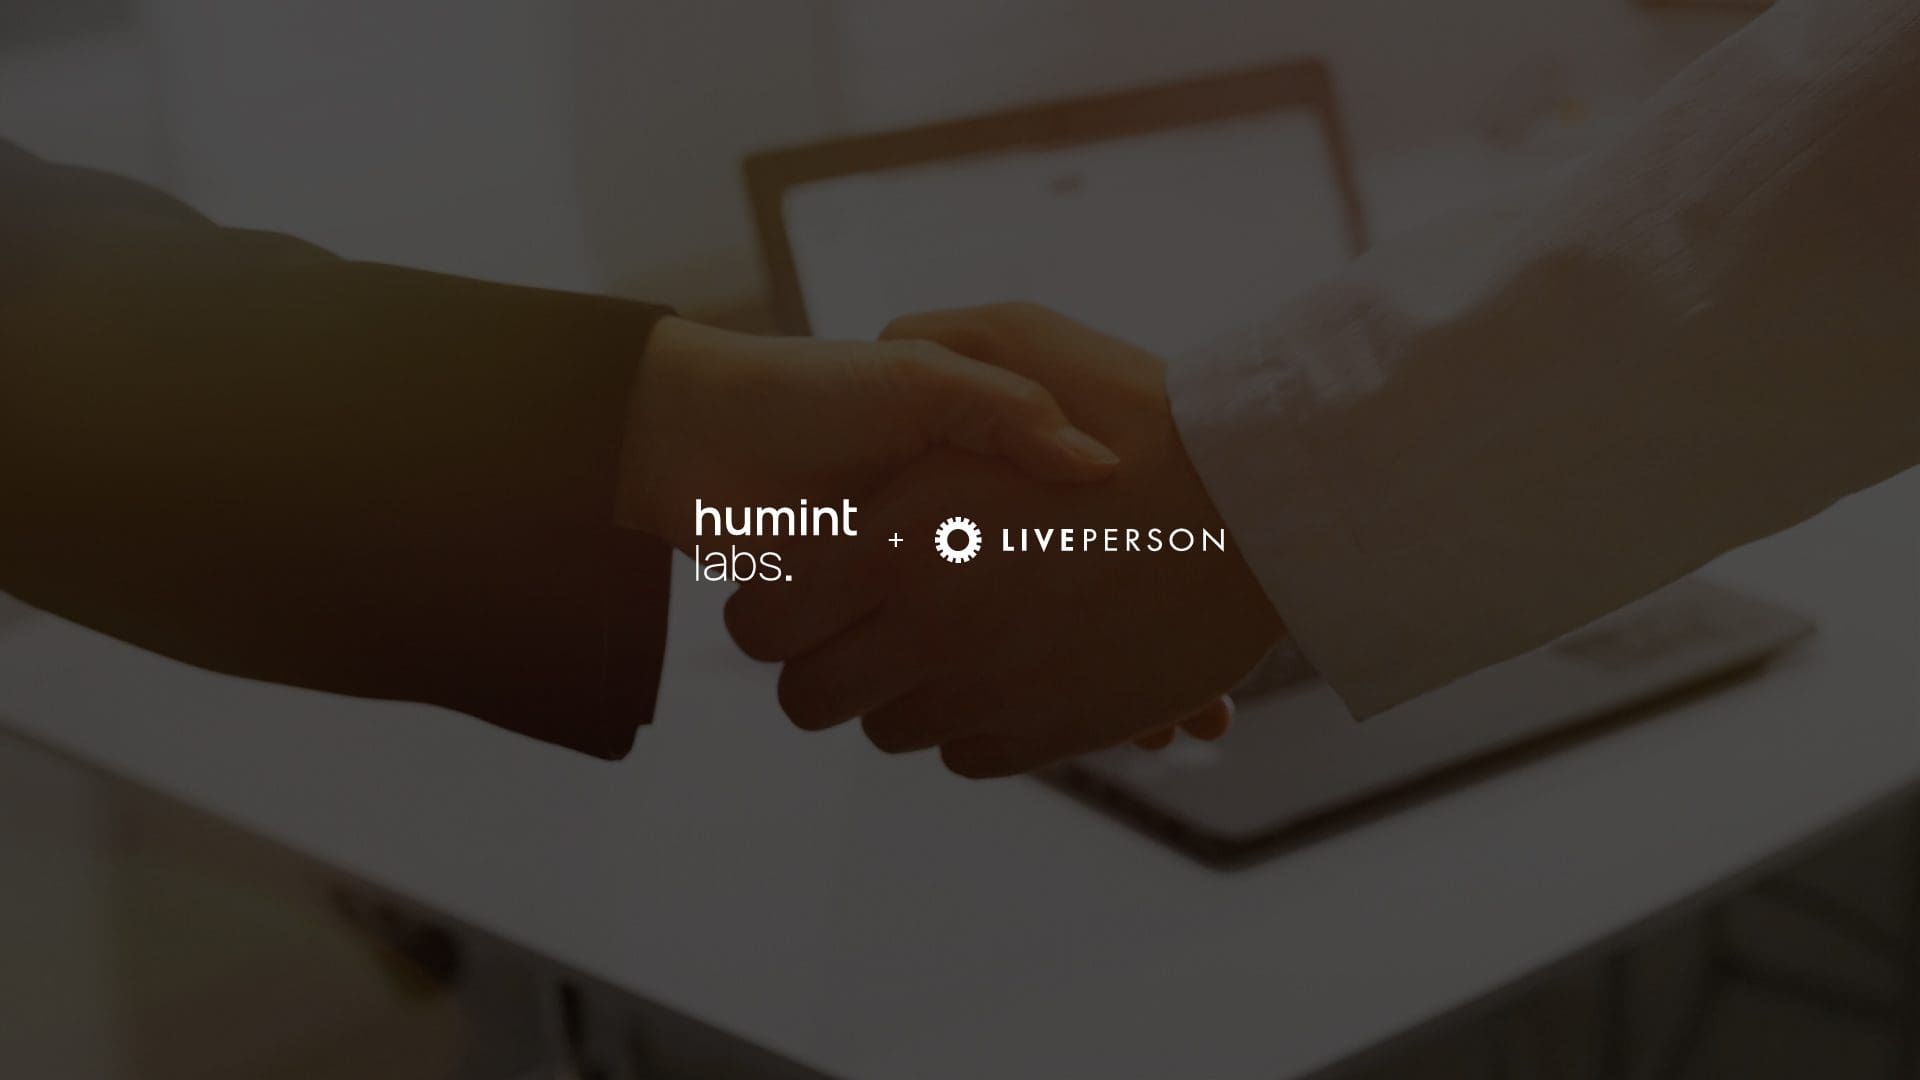 Humint Labs & LivePerson partnership